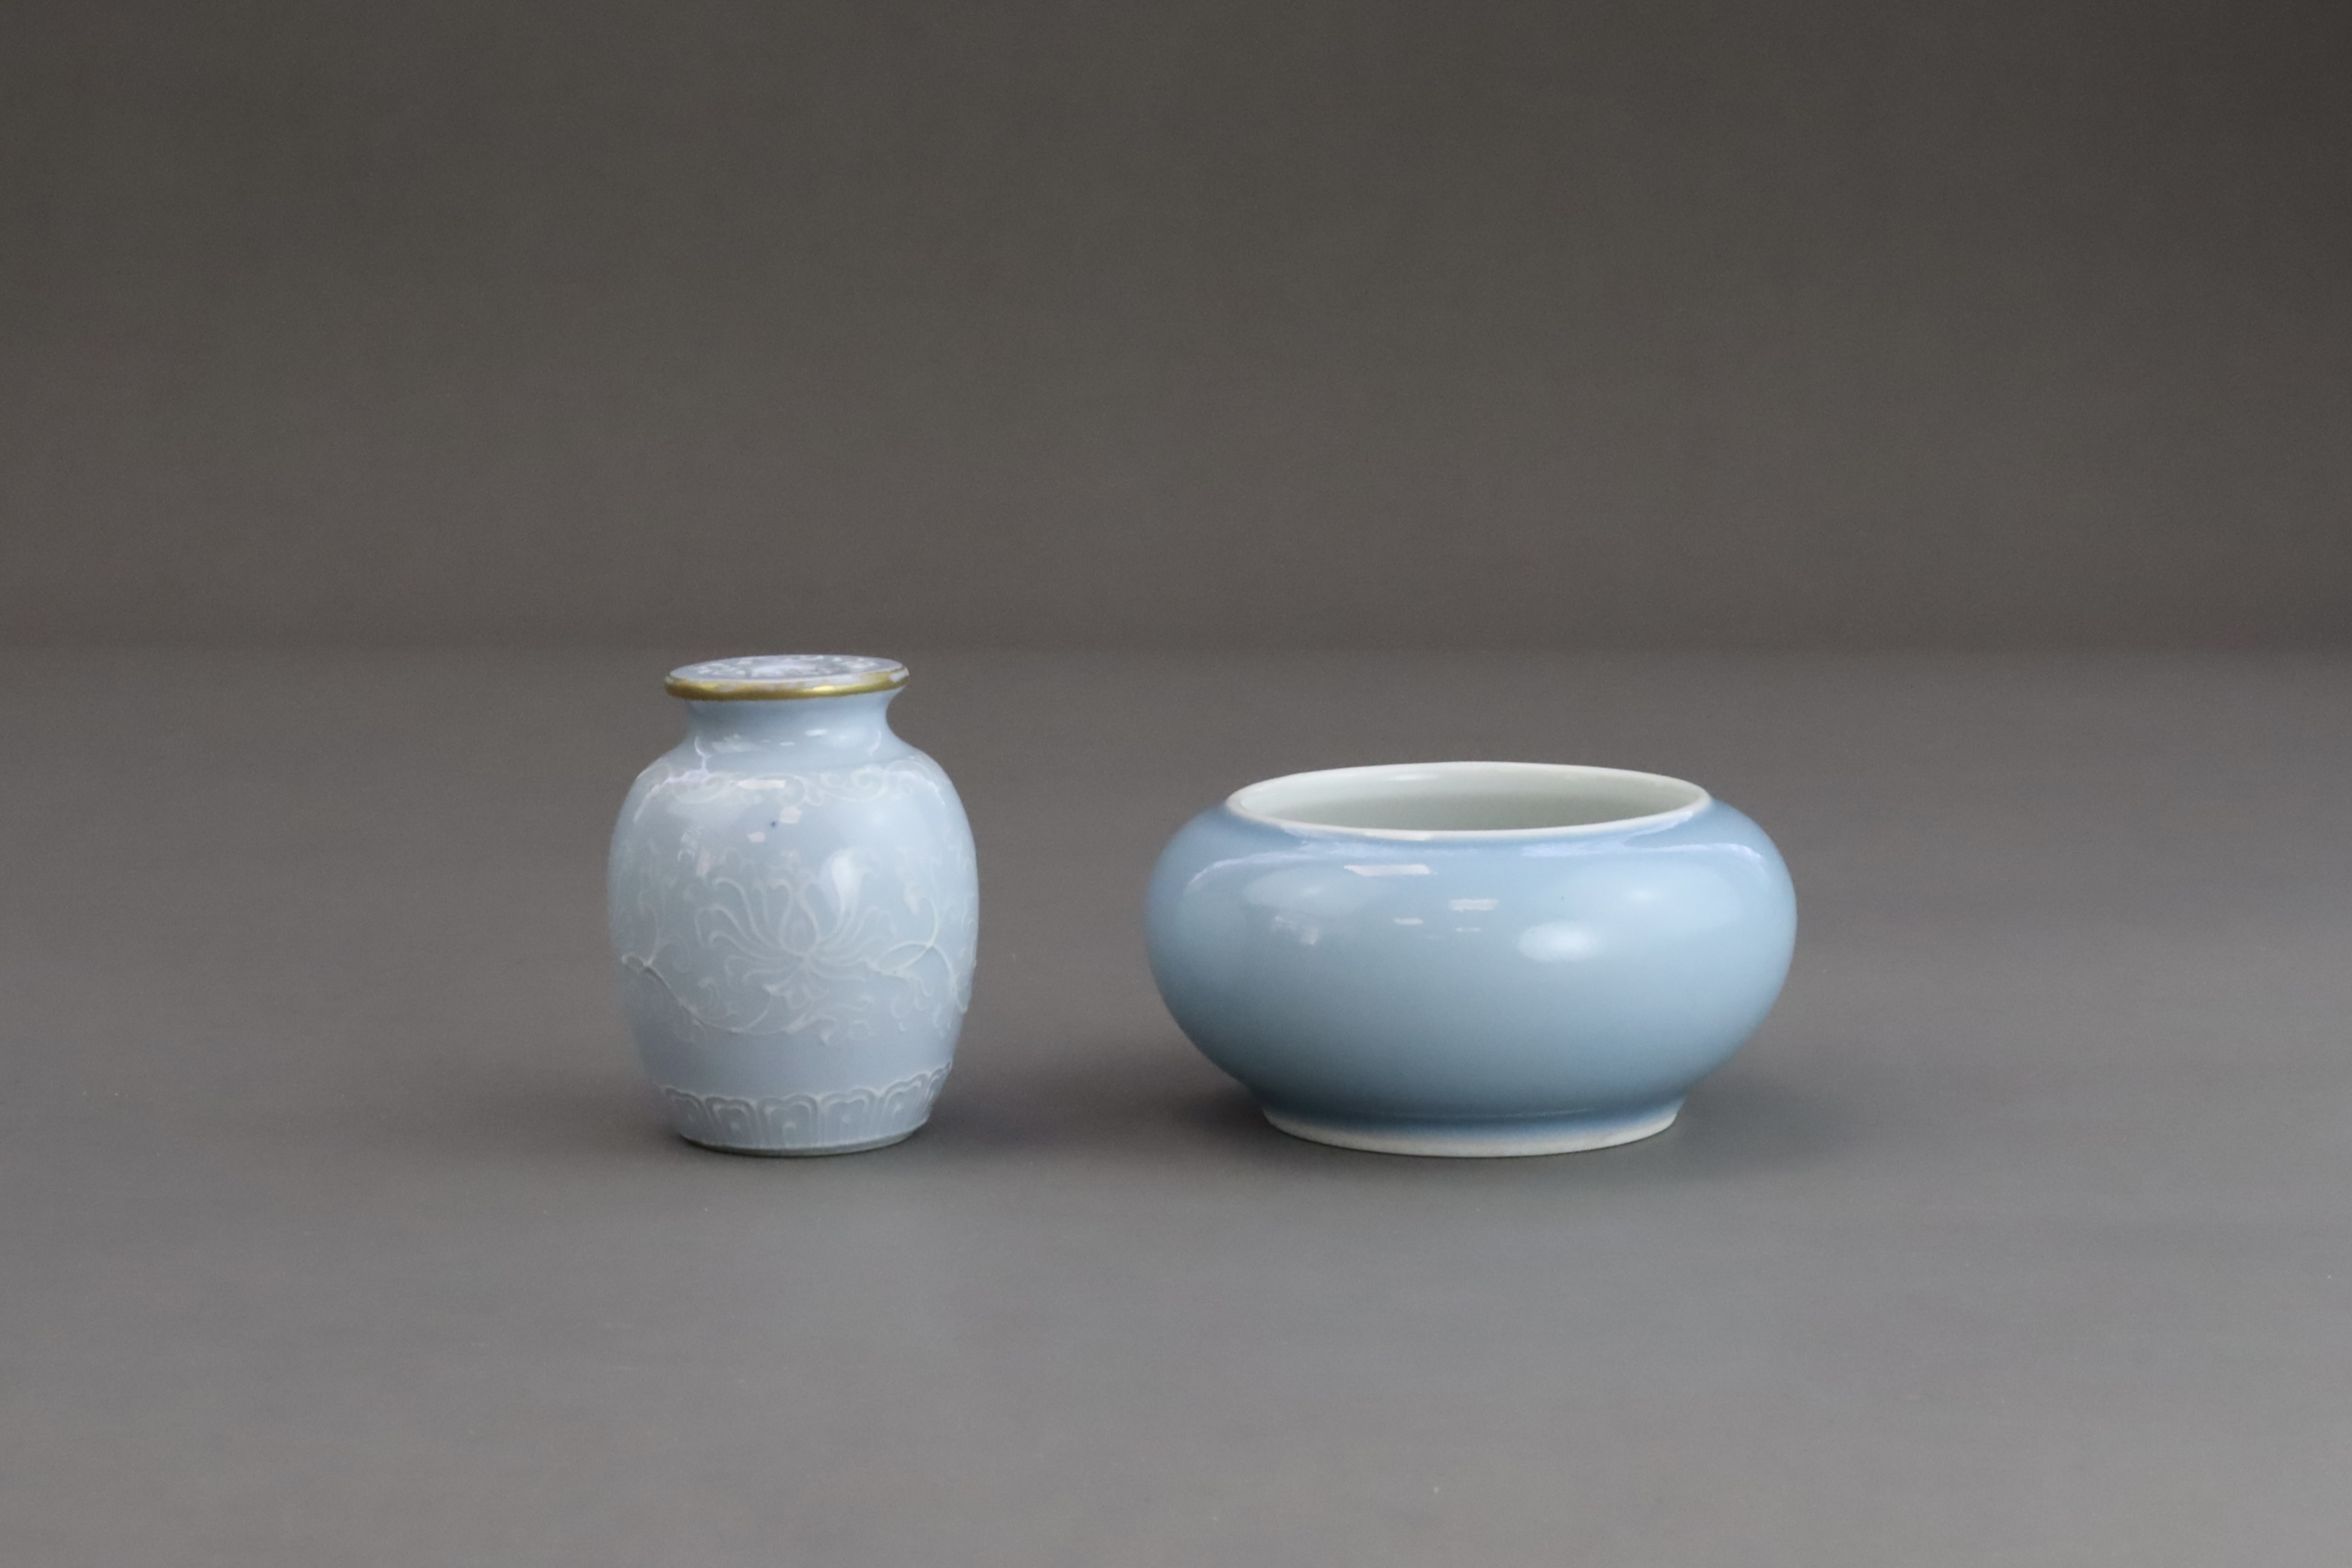  'Clair de lune': A Brushwasher, Guangxu mark and period, and a Moulded small Jar, Qing dynasty - Image 4 of 7